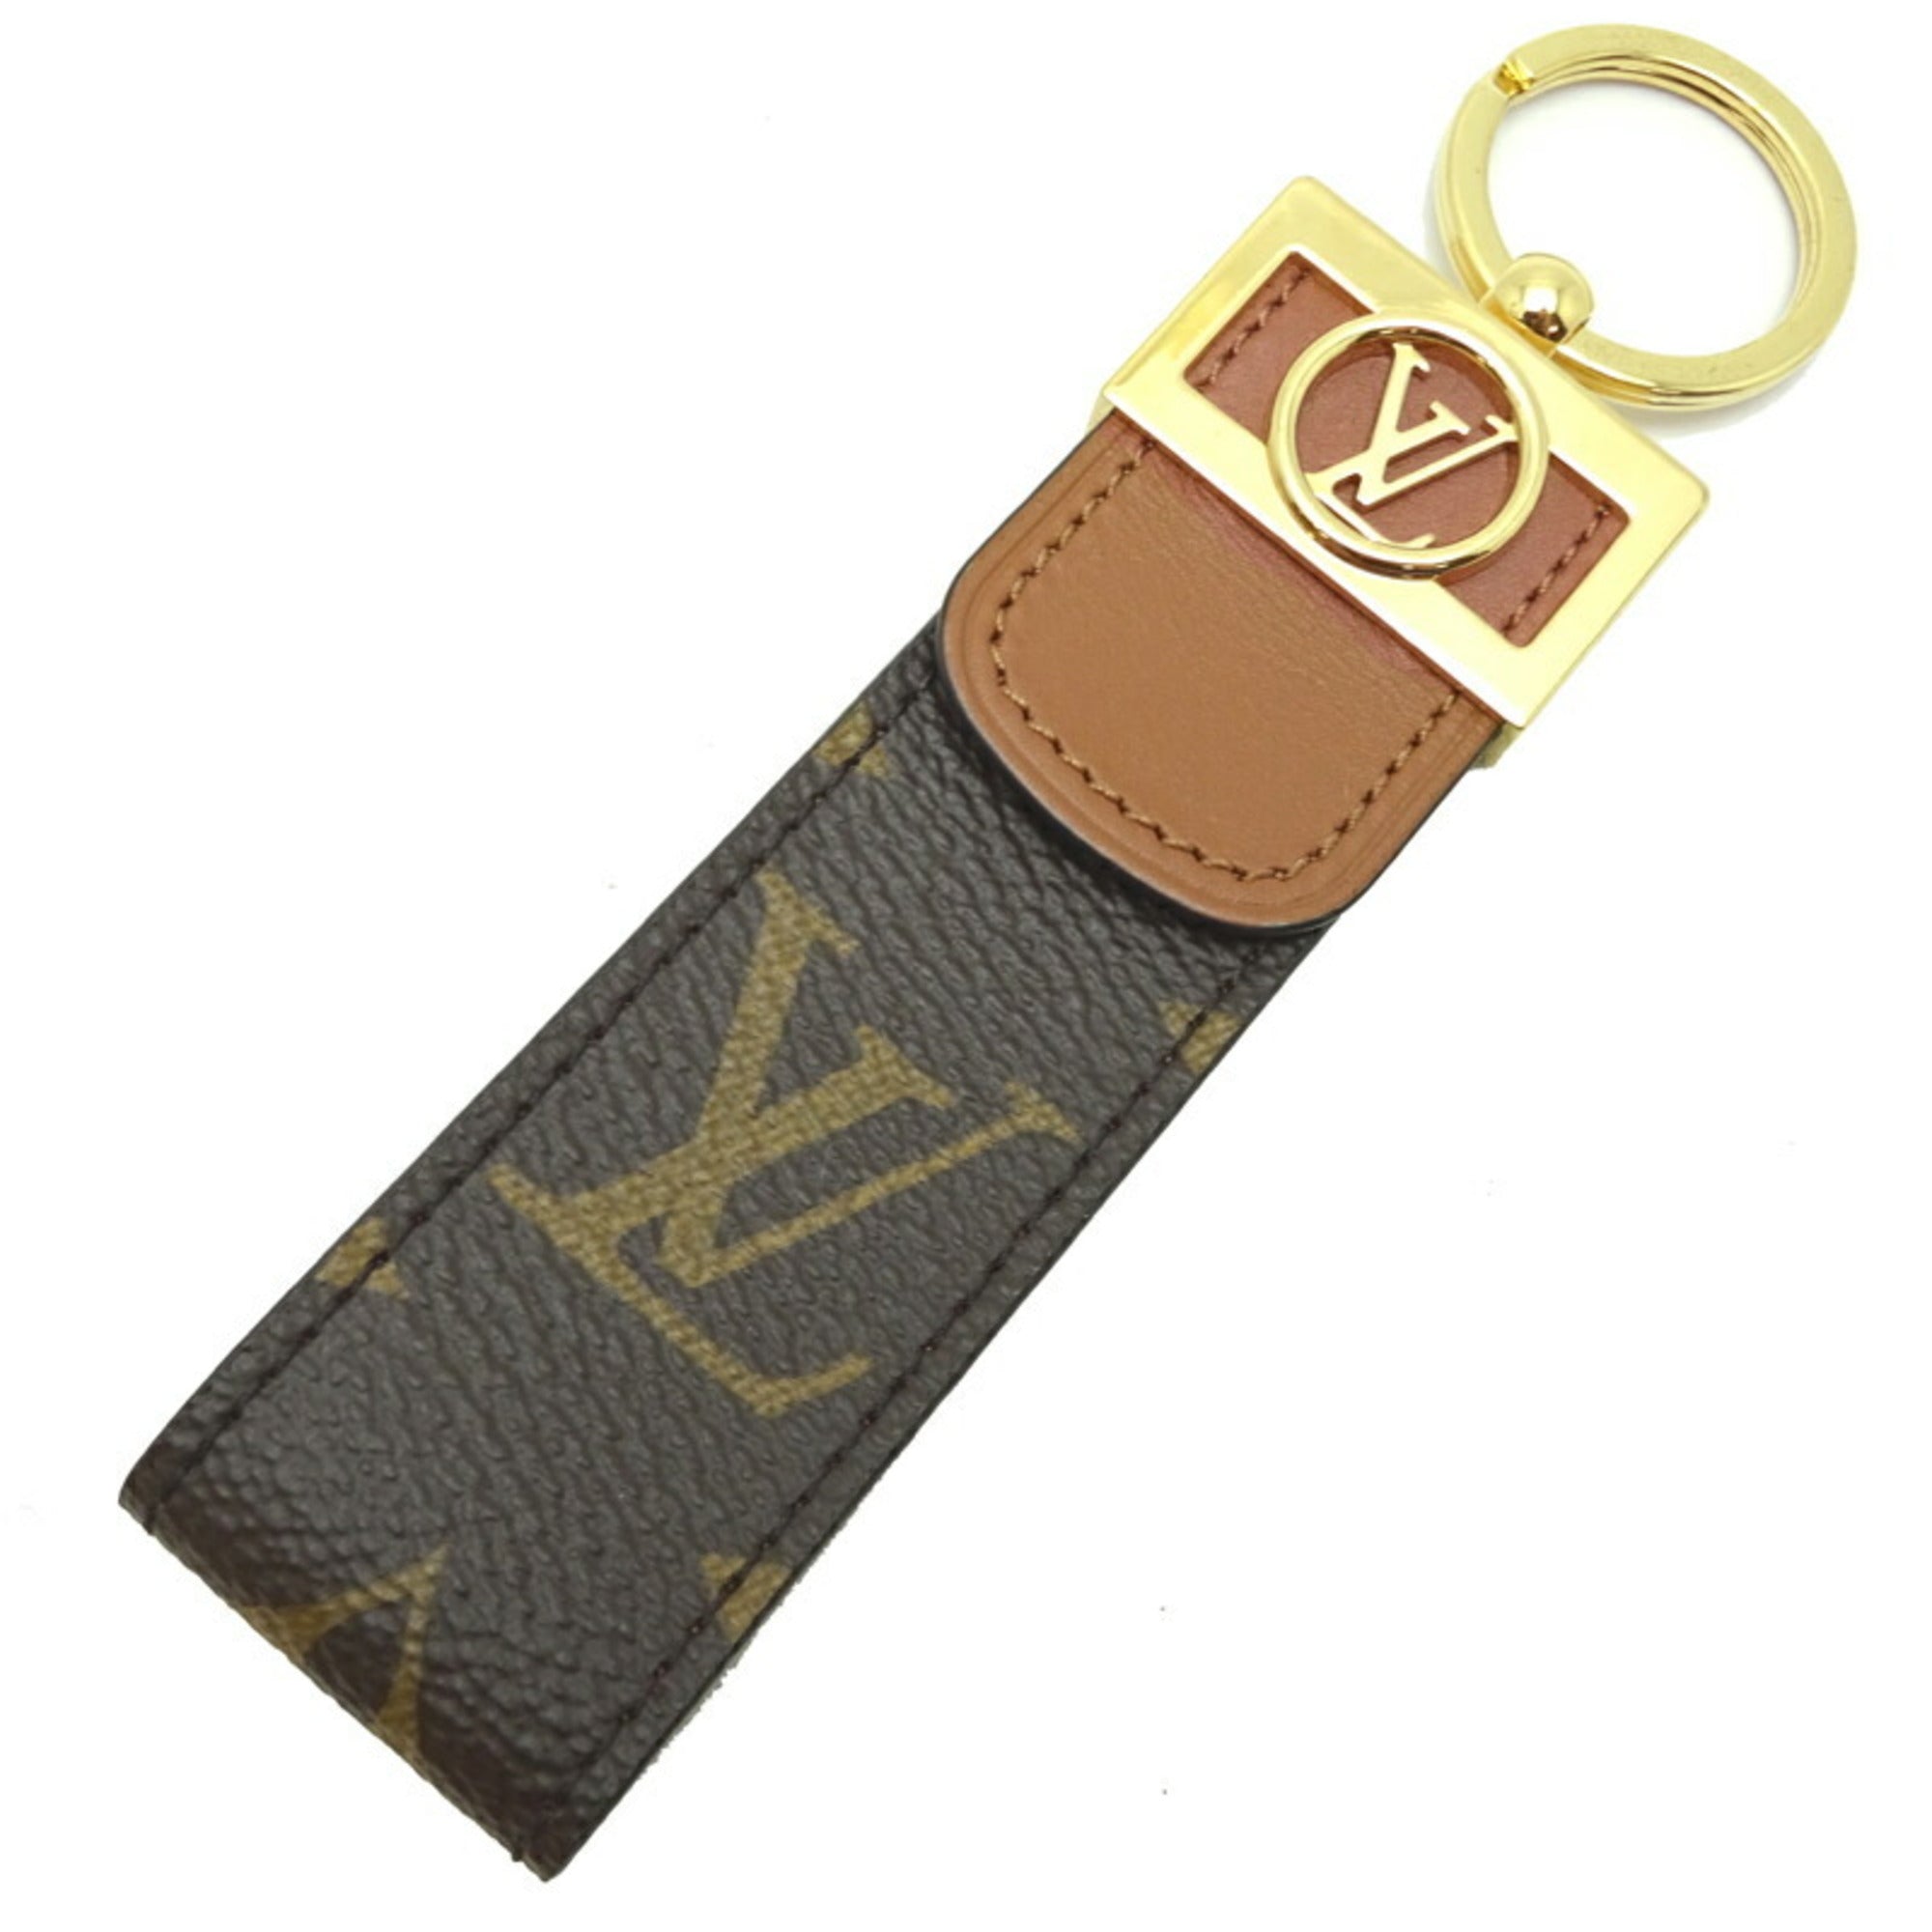 LOUIS VUITTON Damier Dragonne LV Key Holder Ring used condition